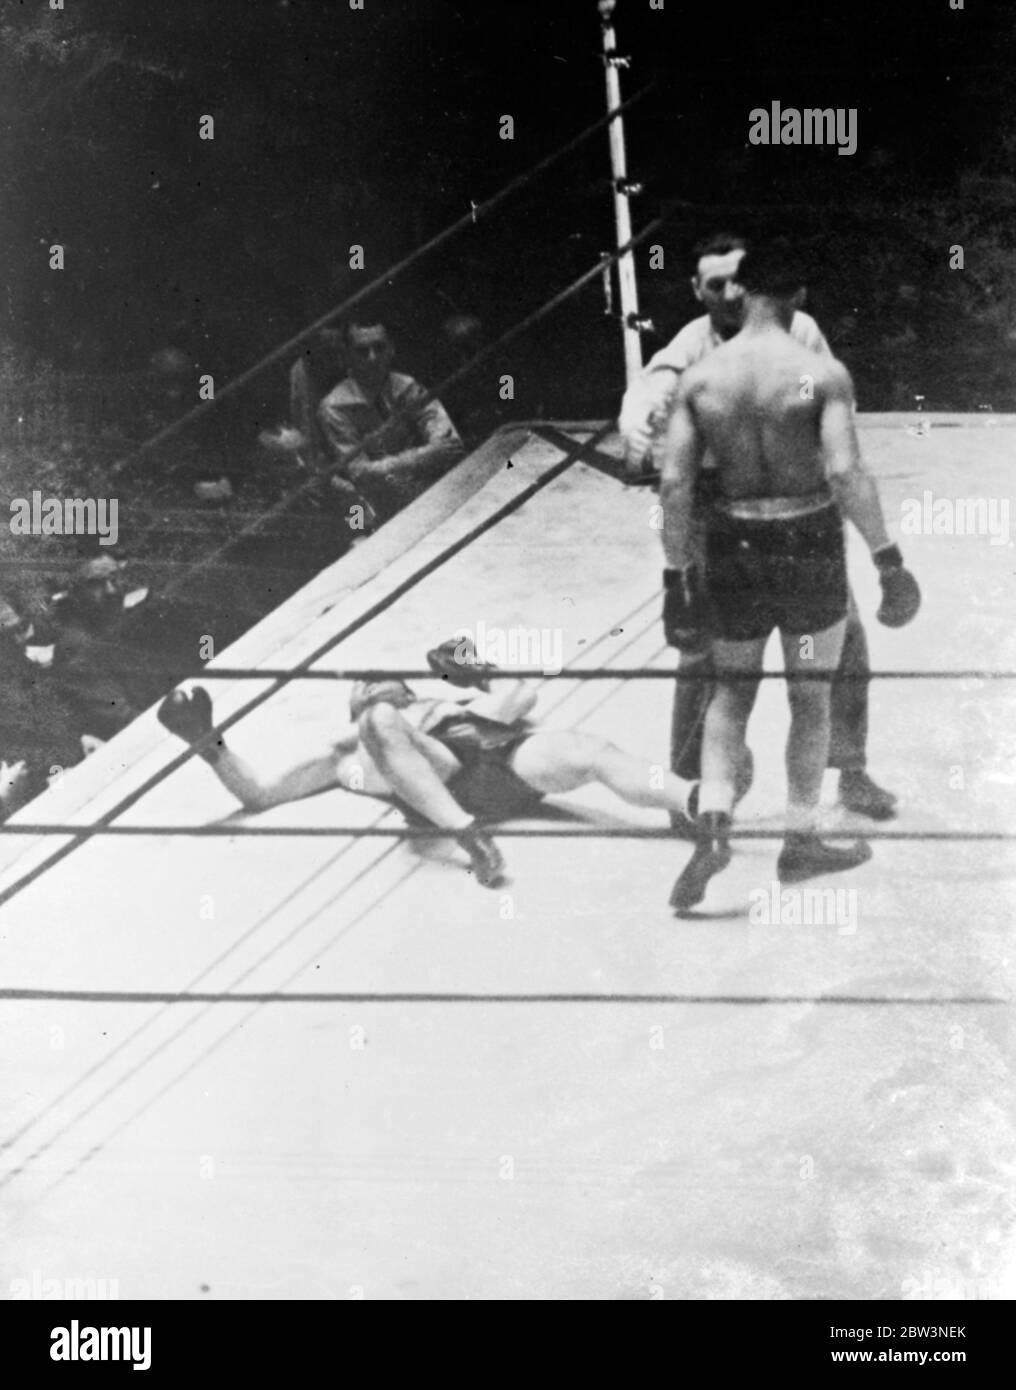 Paulino hits canvas for first time in 13 years as Joe Louis pounds him to defeat . Punched from pillar to post after having been floored for the first for the first time in 13 years , Paulino Uzcudan , the Spanish heavyweight , became the latest victim of Joe Louds , the ' Brown Bomber ' at Madison Square Garden , New York . Louis was awarded the decision on a technical knock out in the fourth round . Photo shows , paulino floored , for the first time in 13 years , from a terrific right to the jaw by Joe Louis in the fourth round . Louis is being led to a neutral corner by Referee Arthur Donov Stock Photo